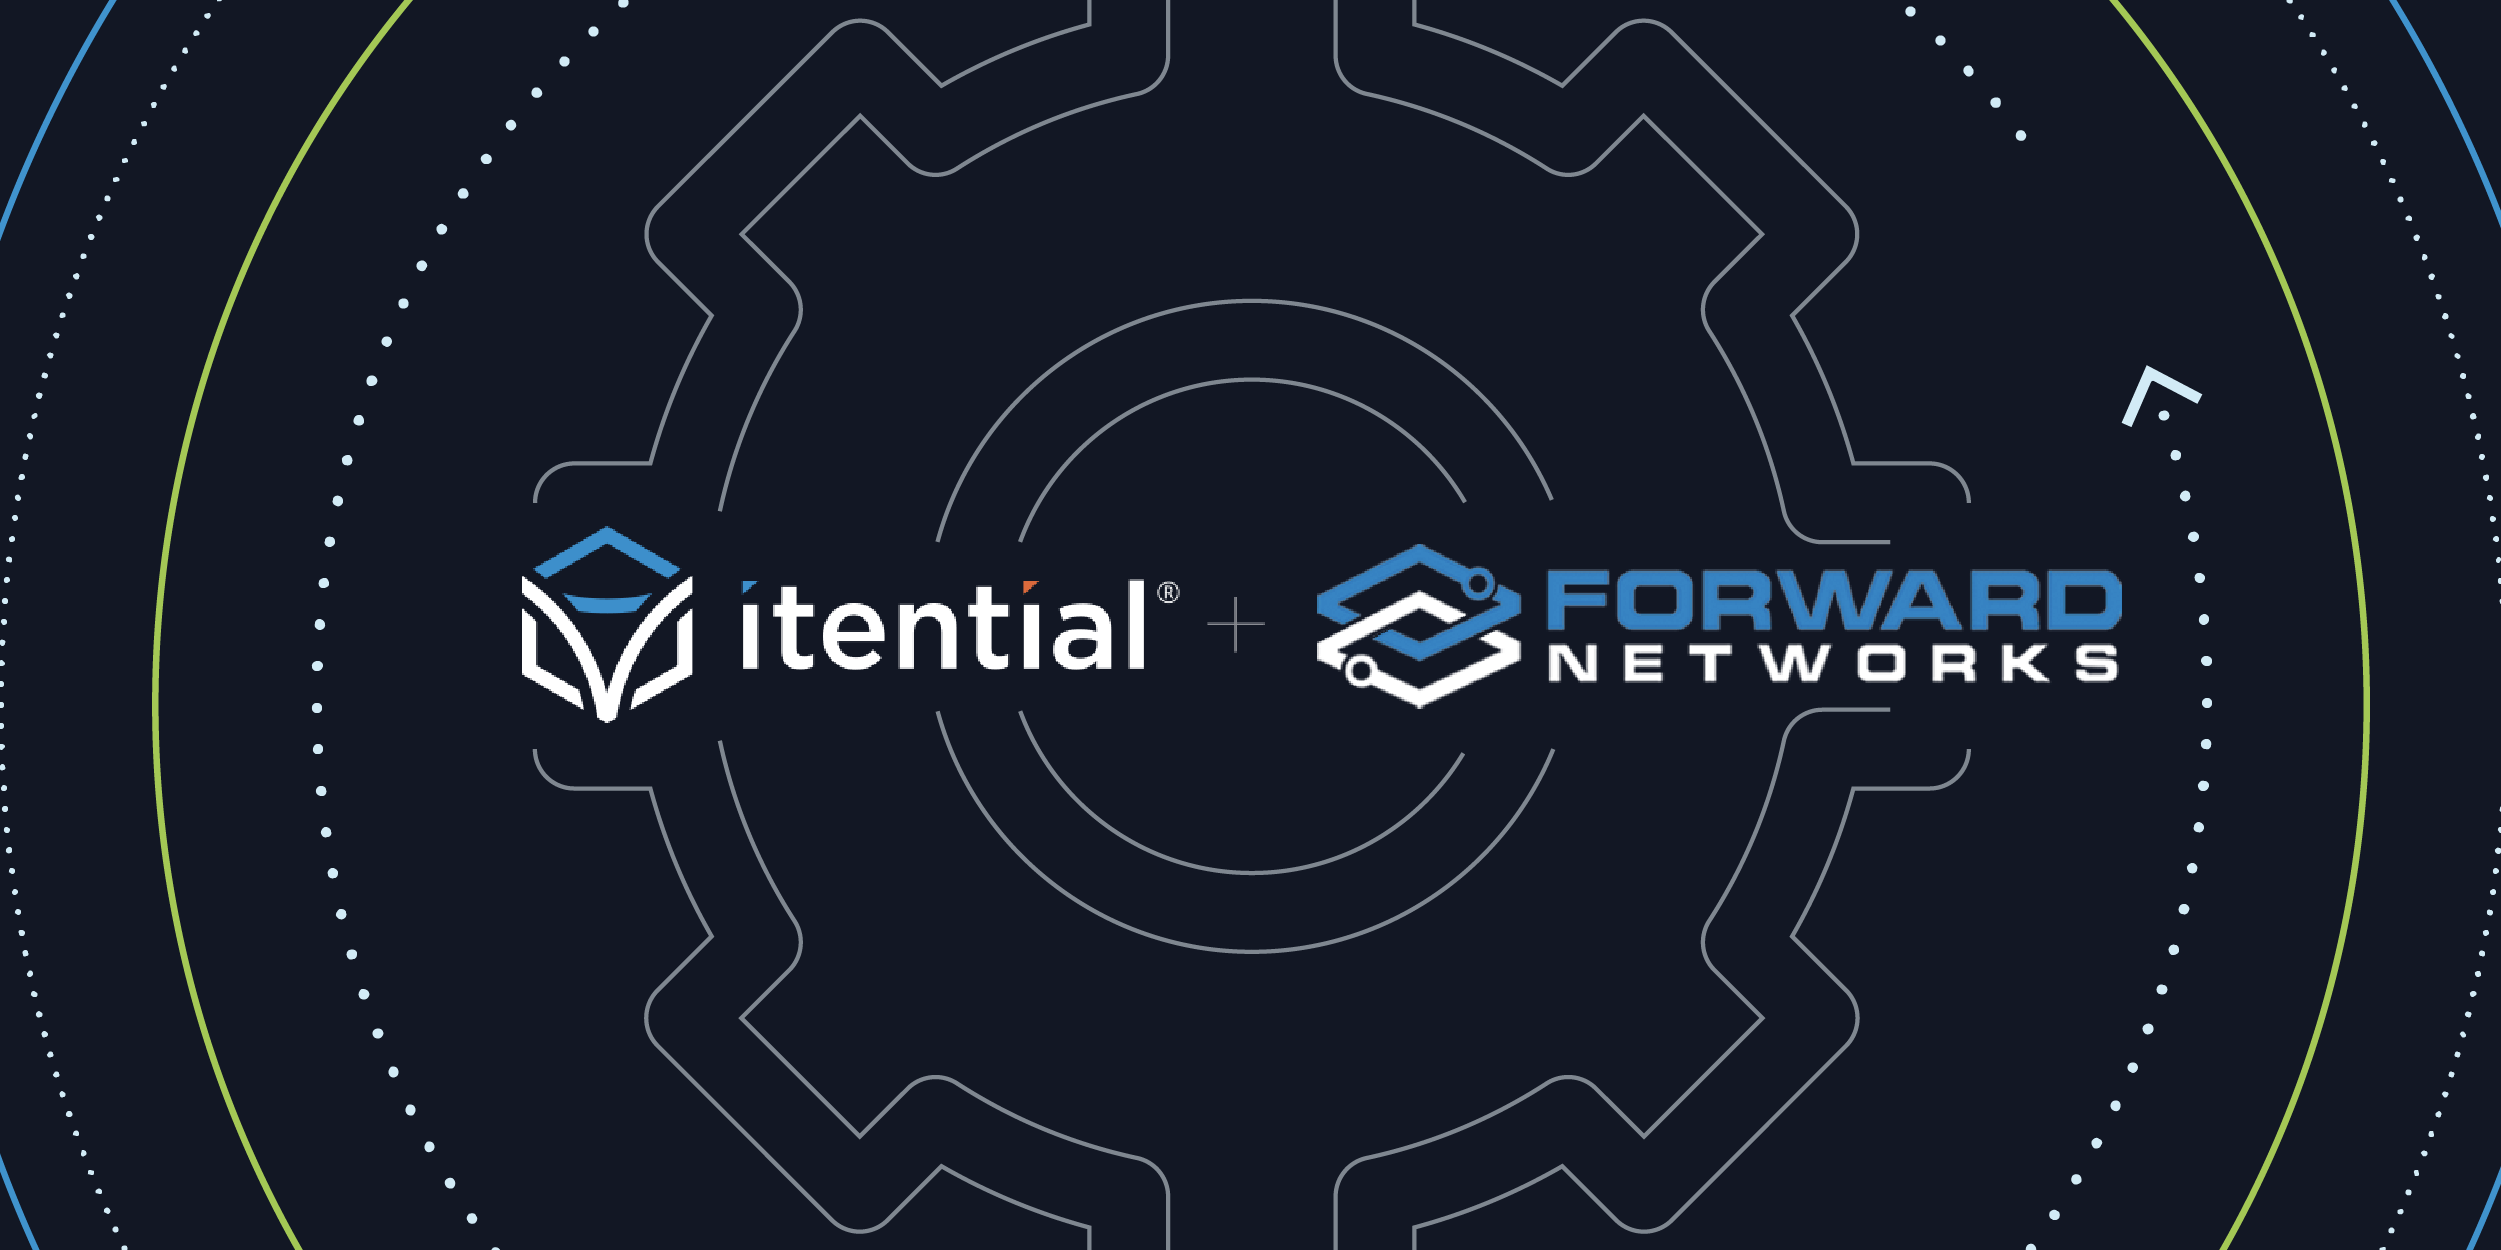 Itential & Forward Networks Integrate to Enable Closed-Loop Network Automation